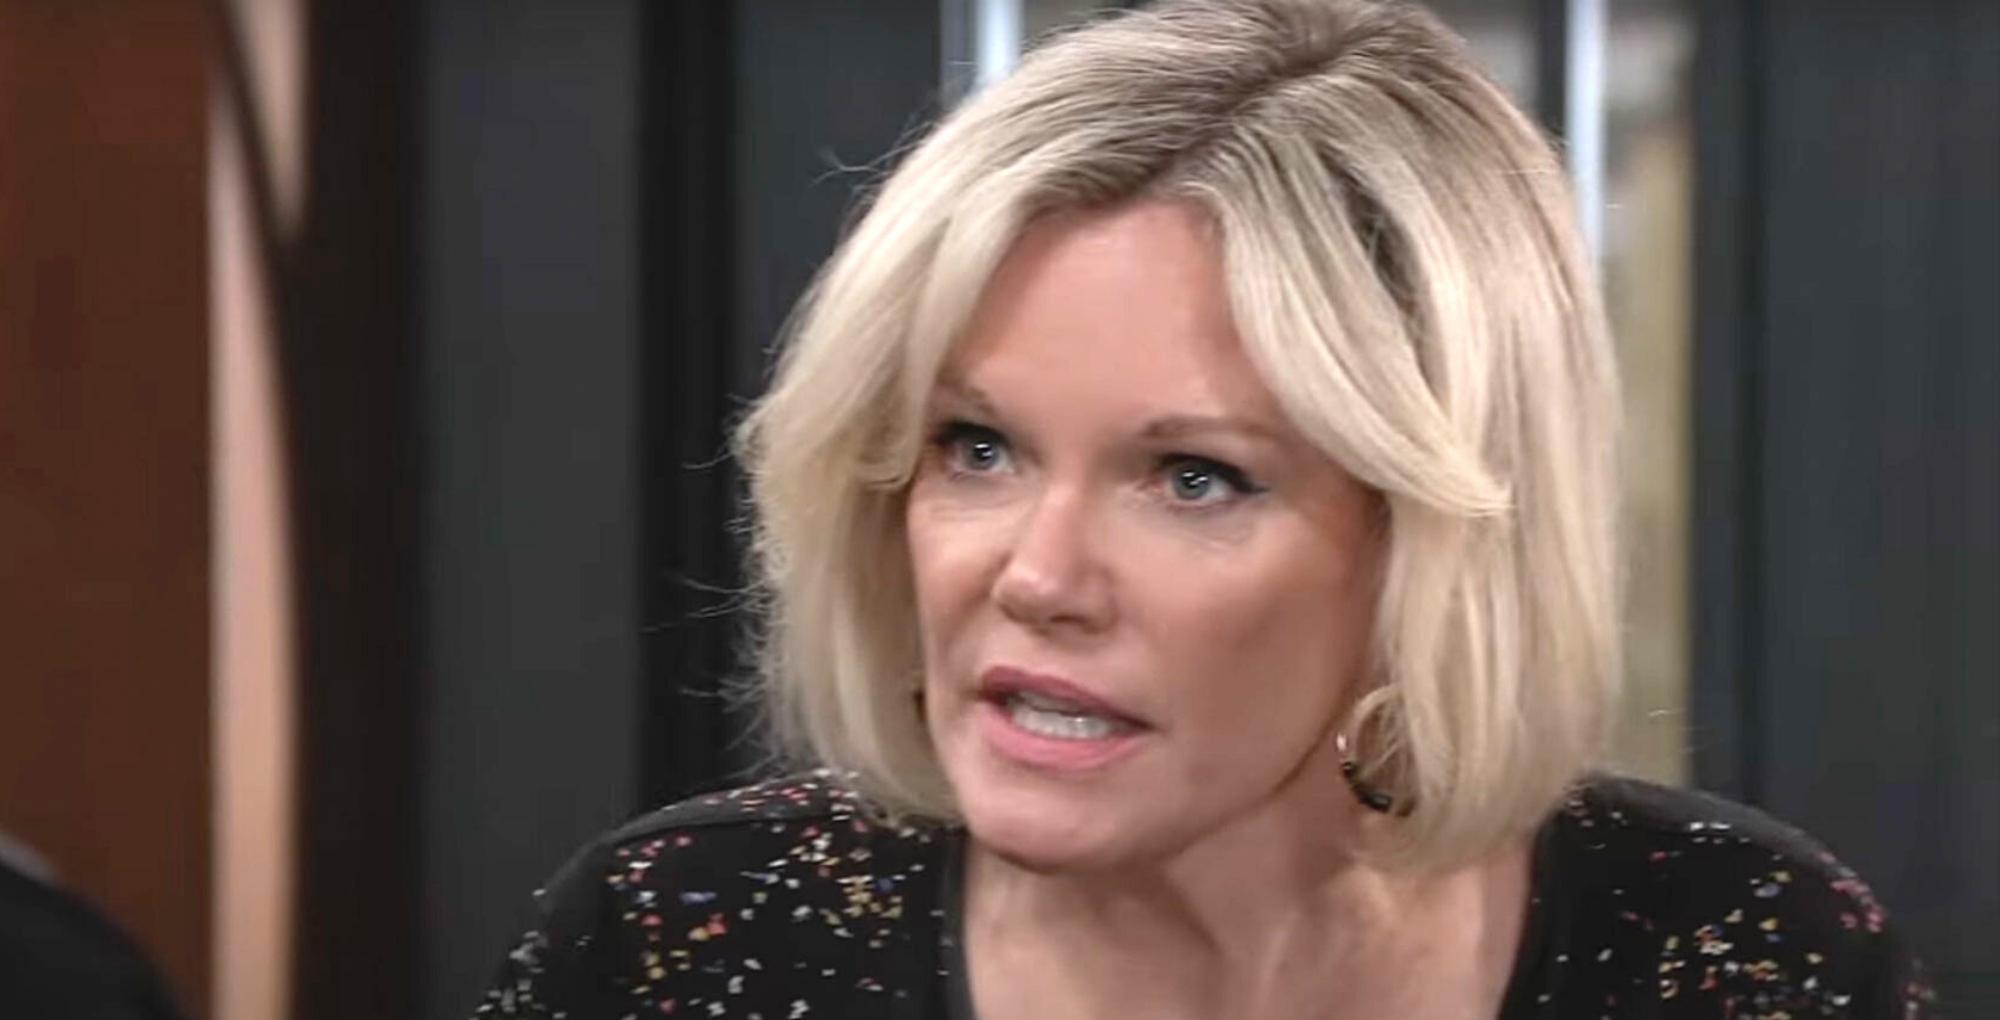 general hospital spoilers for may 24, 2023, have ava learning some big news.